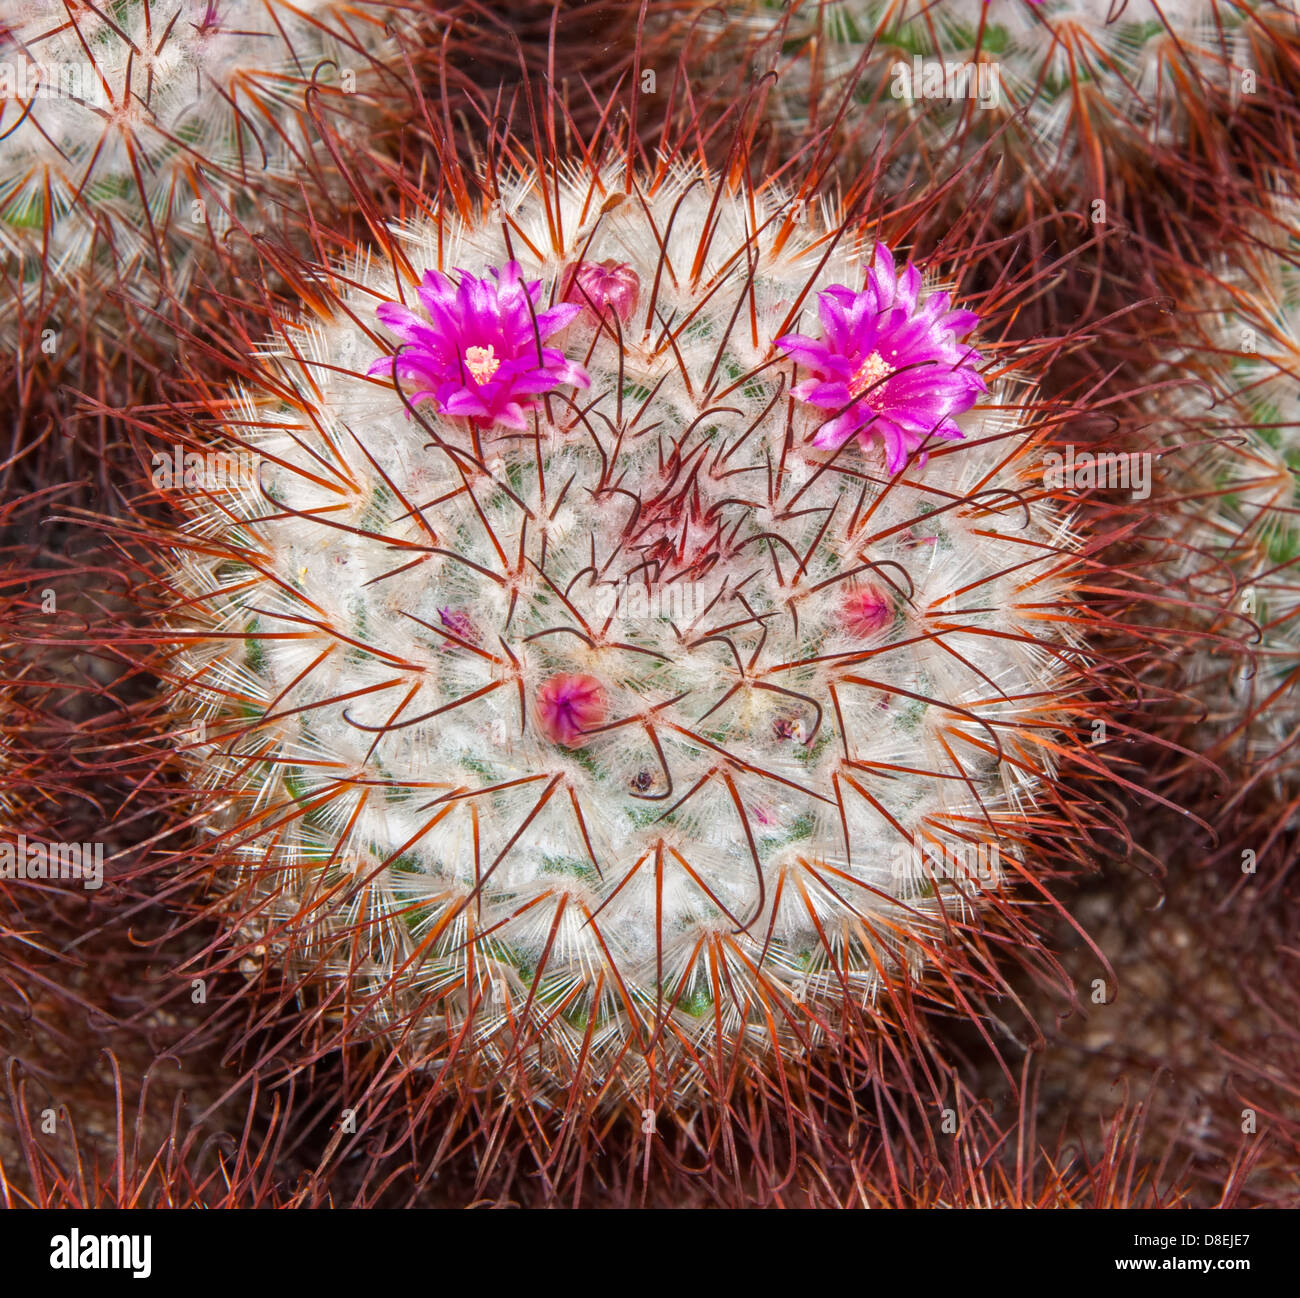 Close-up of Mammillaria bombycina (silken pincushion cactus) showing red hooked spines and purple flowers. Stock Photo